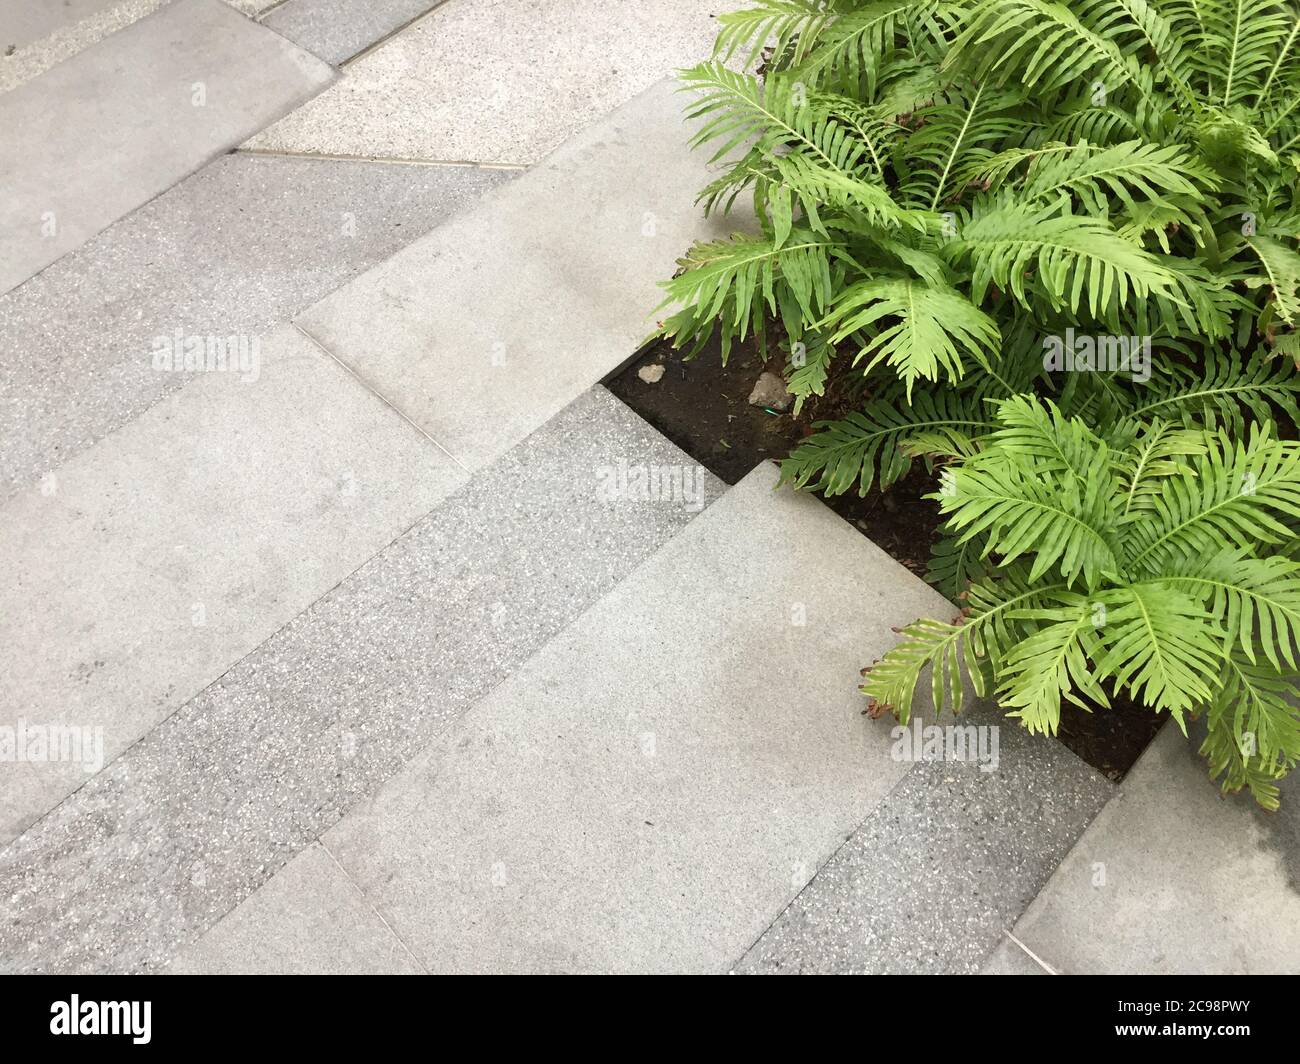 Boston Ferns with copy space on floor Stock Photo